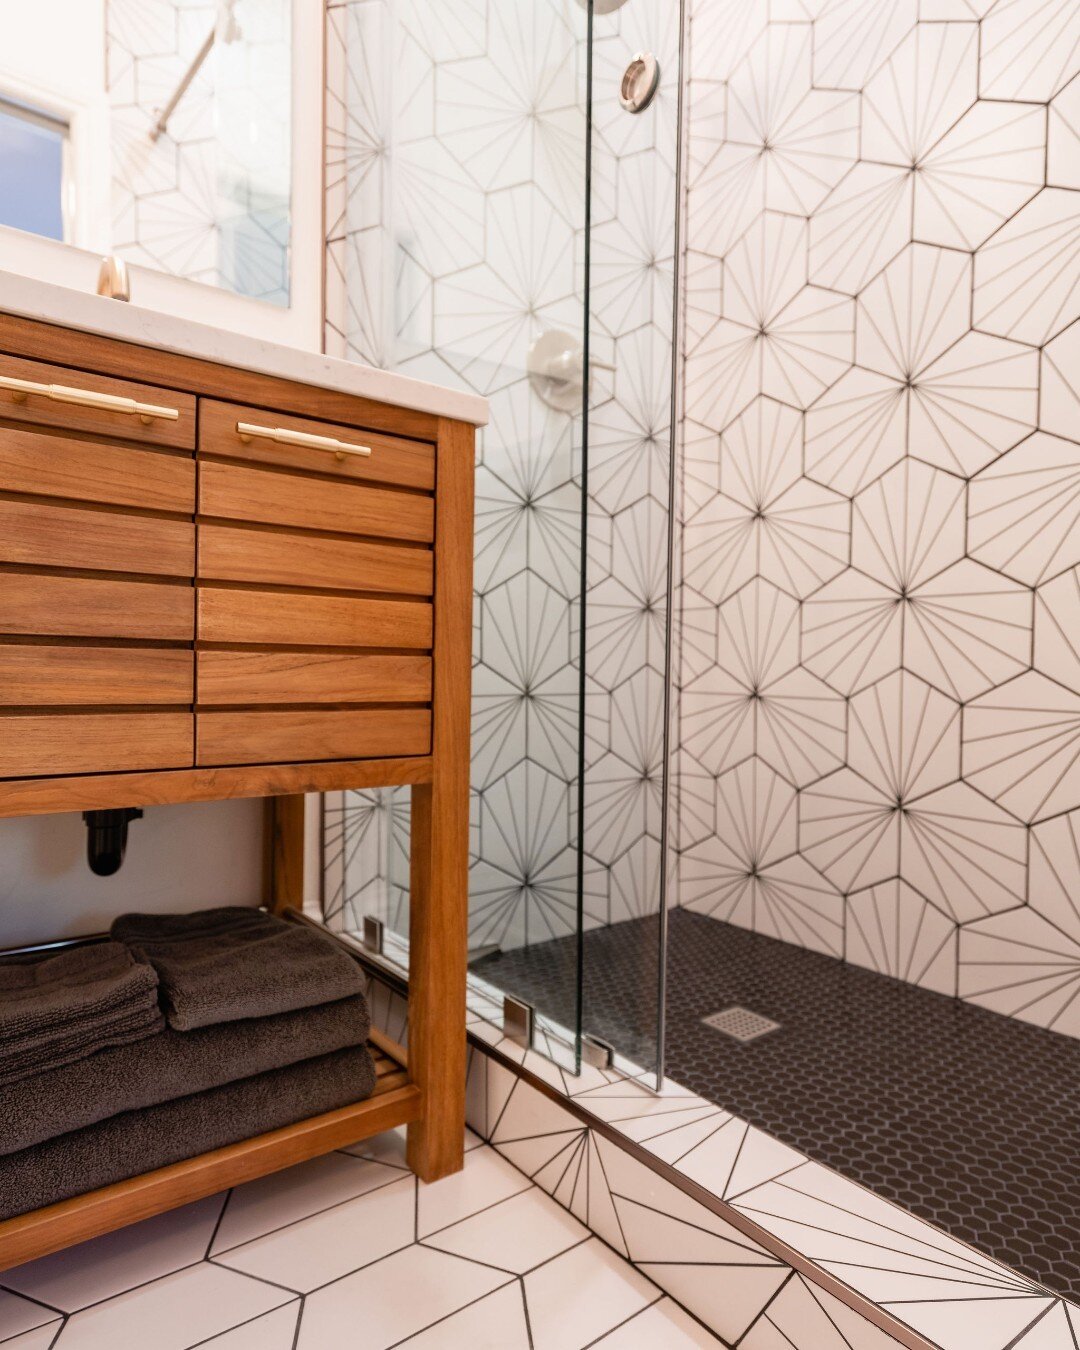 Check out this gorgeous shower tile. We love the contrast with the dark shower floor tile and the wood vanity. Slider doors at the shower are a great way to save space and keep a clean open view to show off the shower tile.

#bathroomrenovation #home